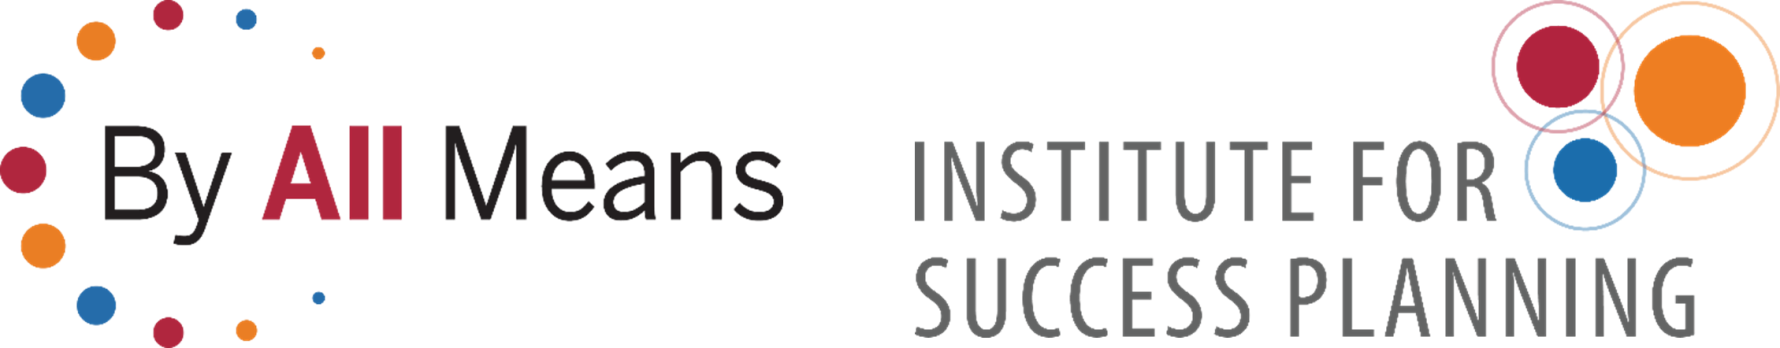 Institute for Success Planning and By All Means logos